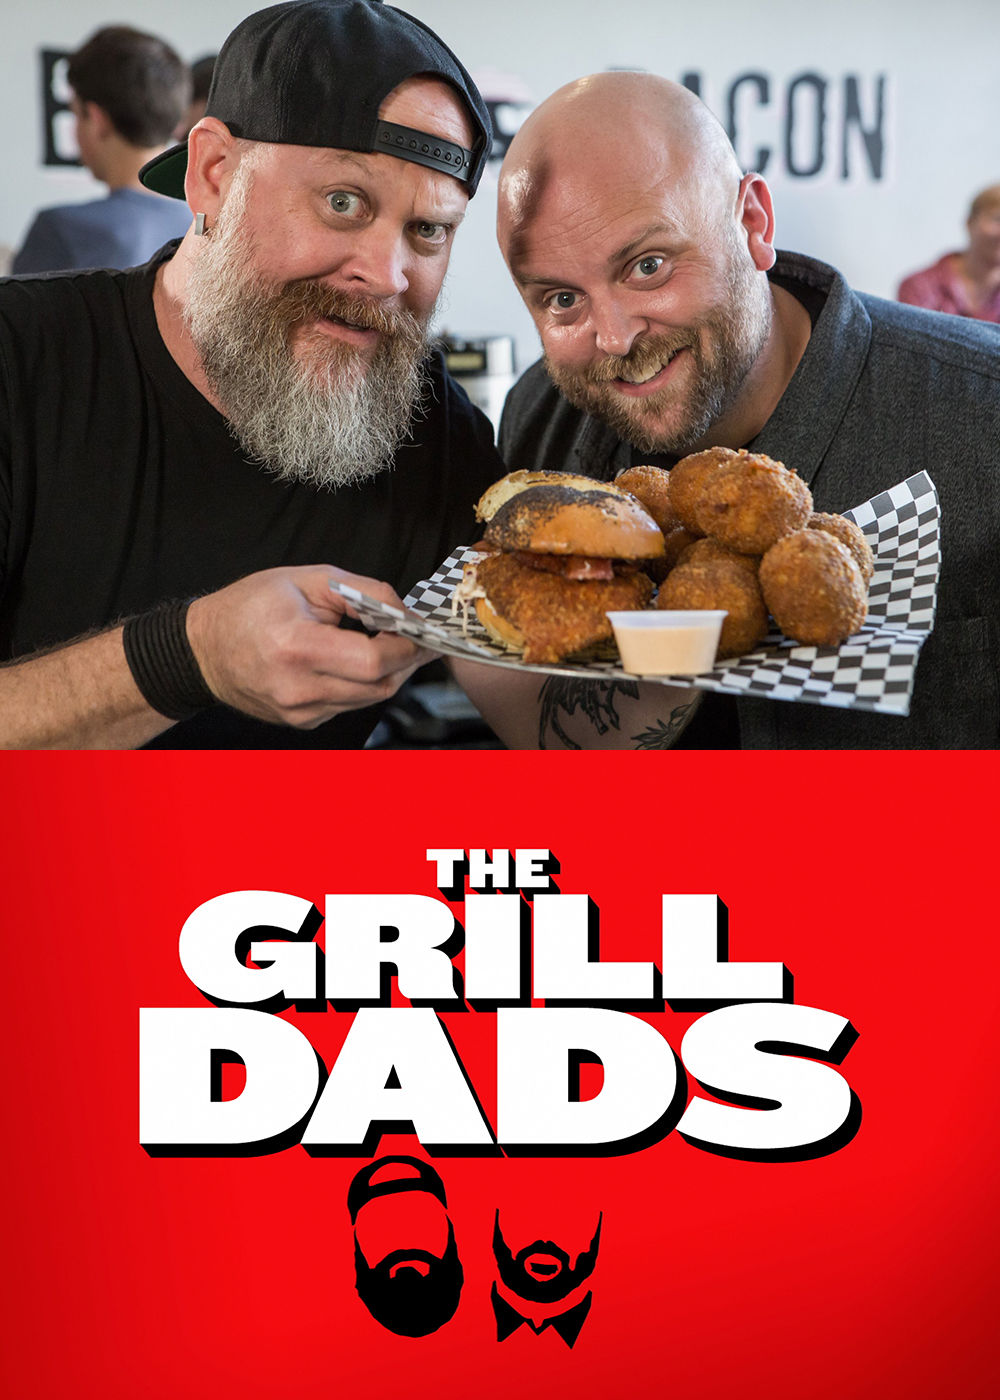 American Classic dad Grill. Dads food